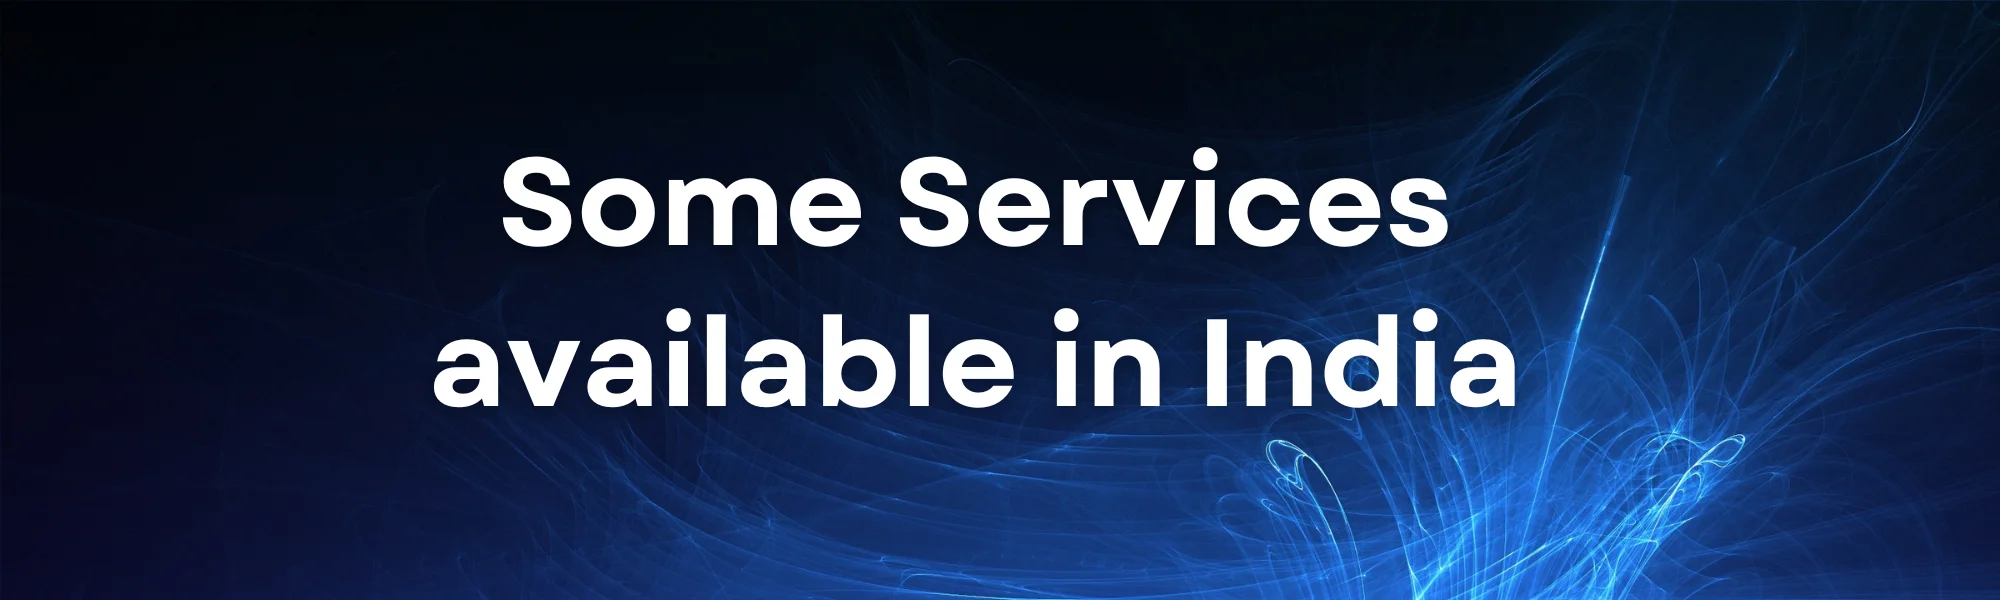 Some Services available in India